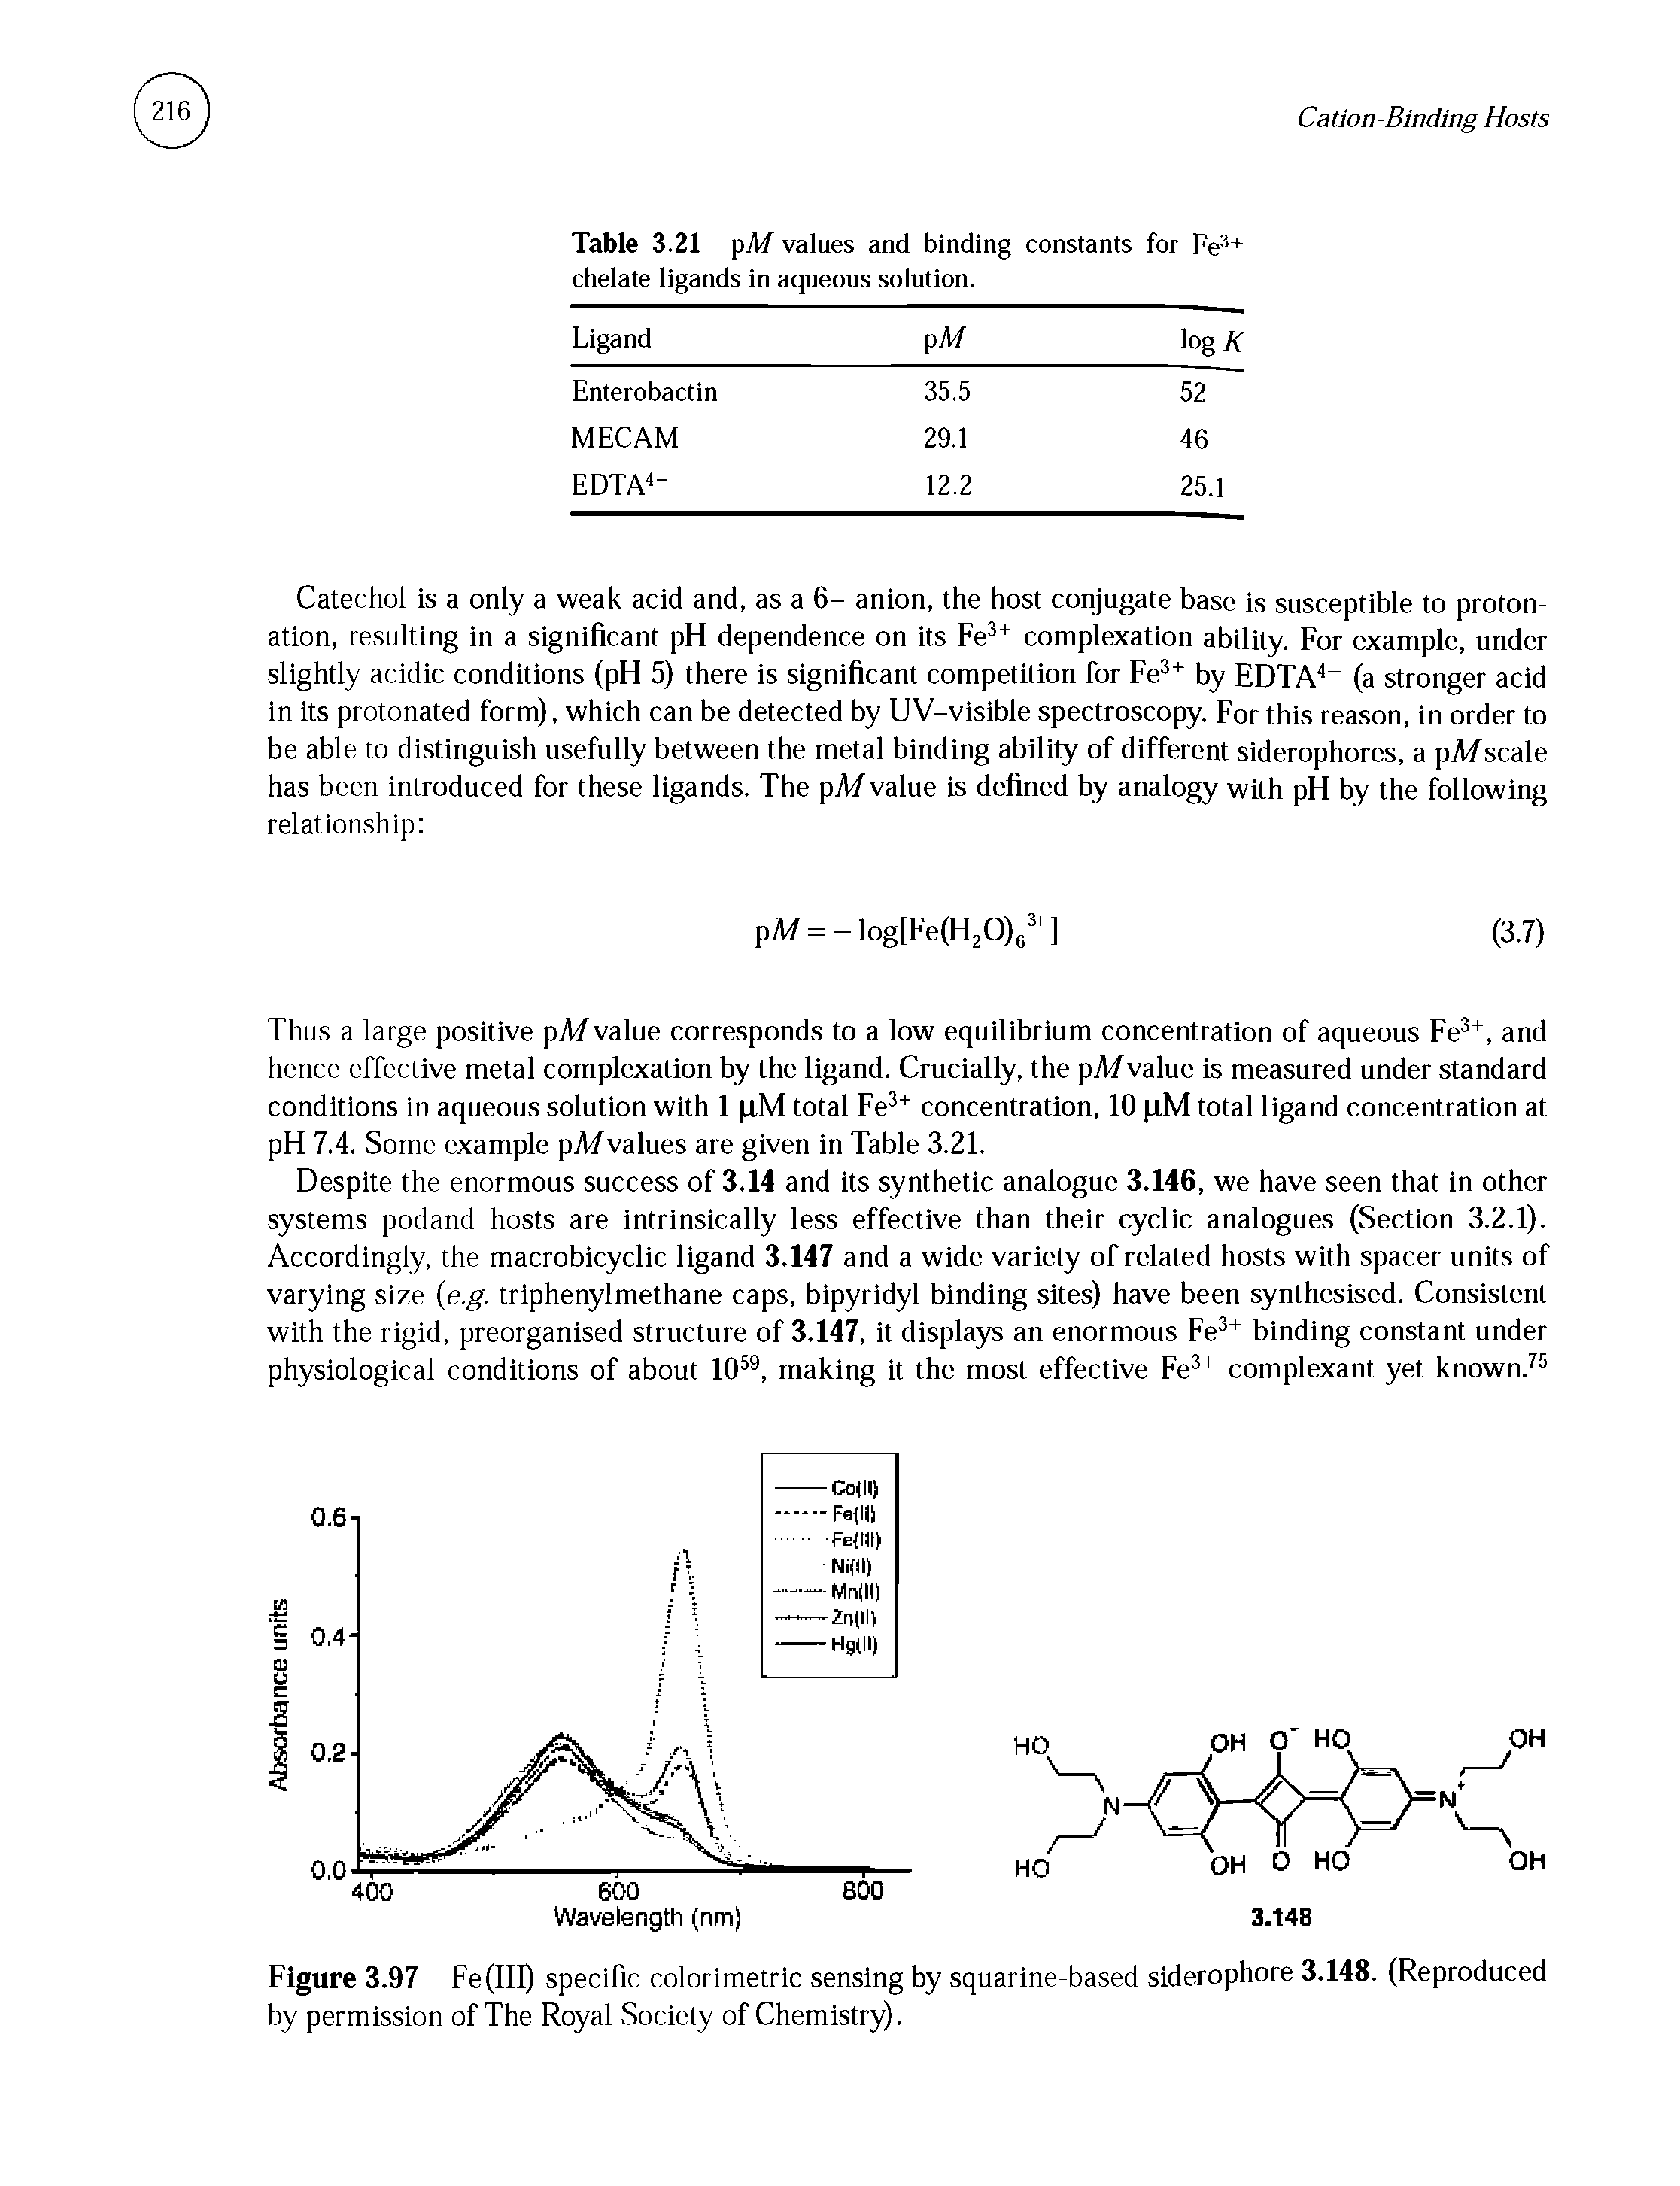 Figure 3.97 Fe (III) specific colorimetric sensing by squarine-based siderophore 3.148. (Reproduced by permission of The Royal Society of Chemistry).